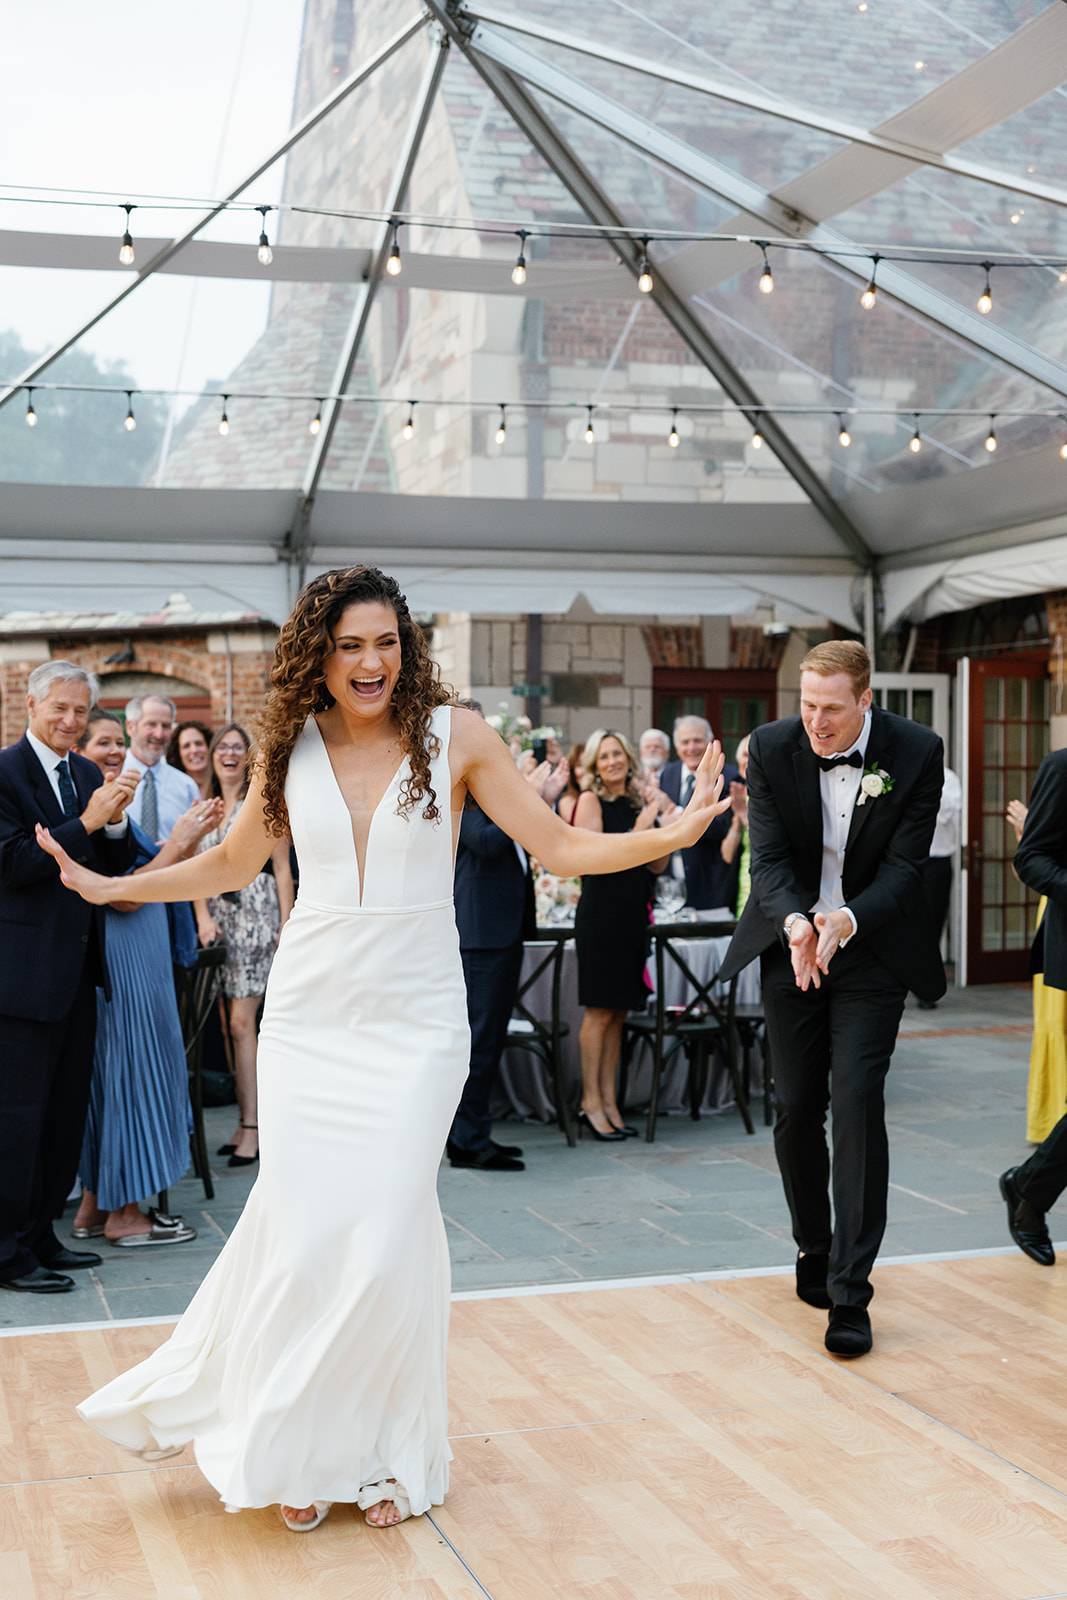 A very happy and smiling bride and groom dancing on the dance floor at their wedding reception under a clear top tent with string bulb lights.